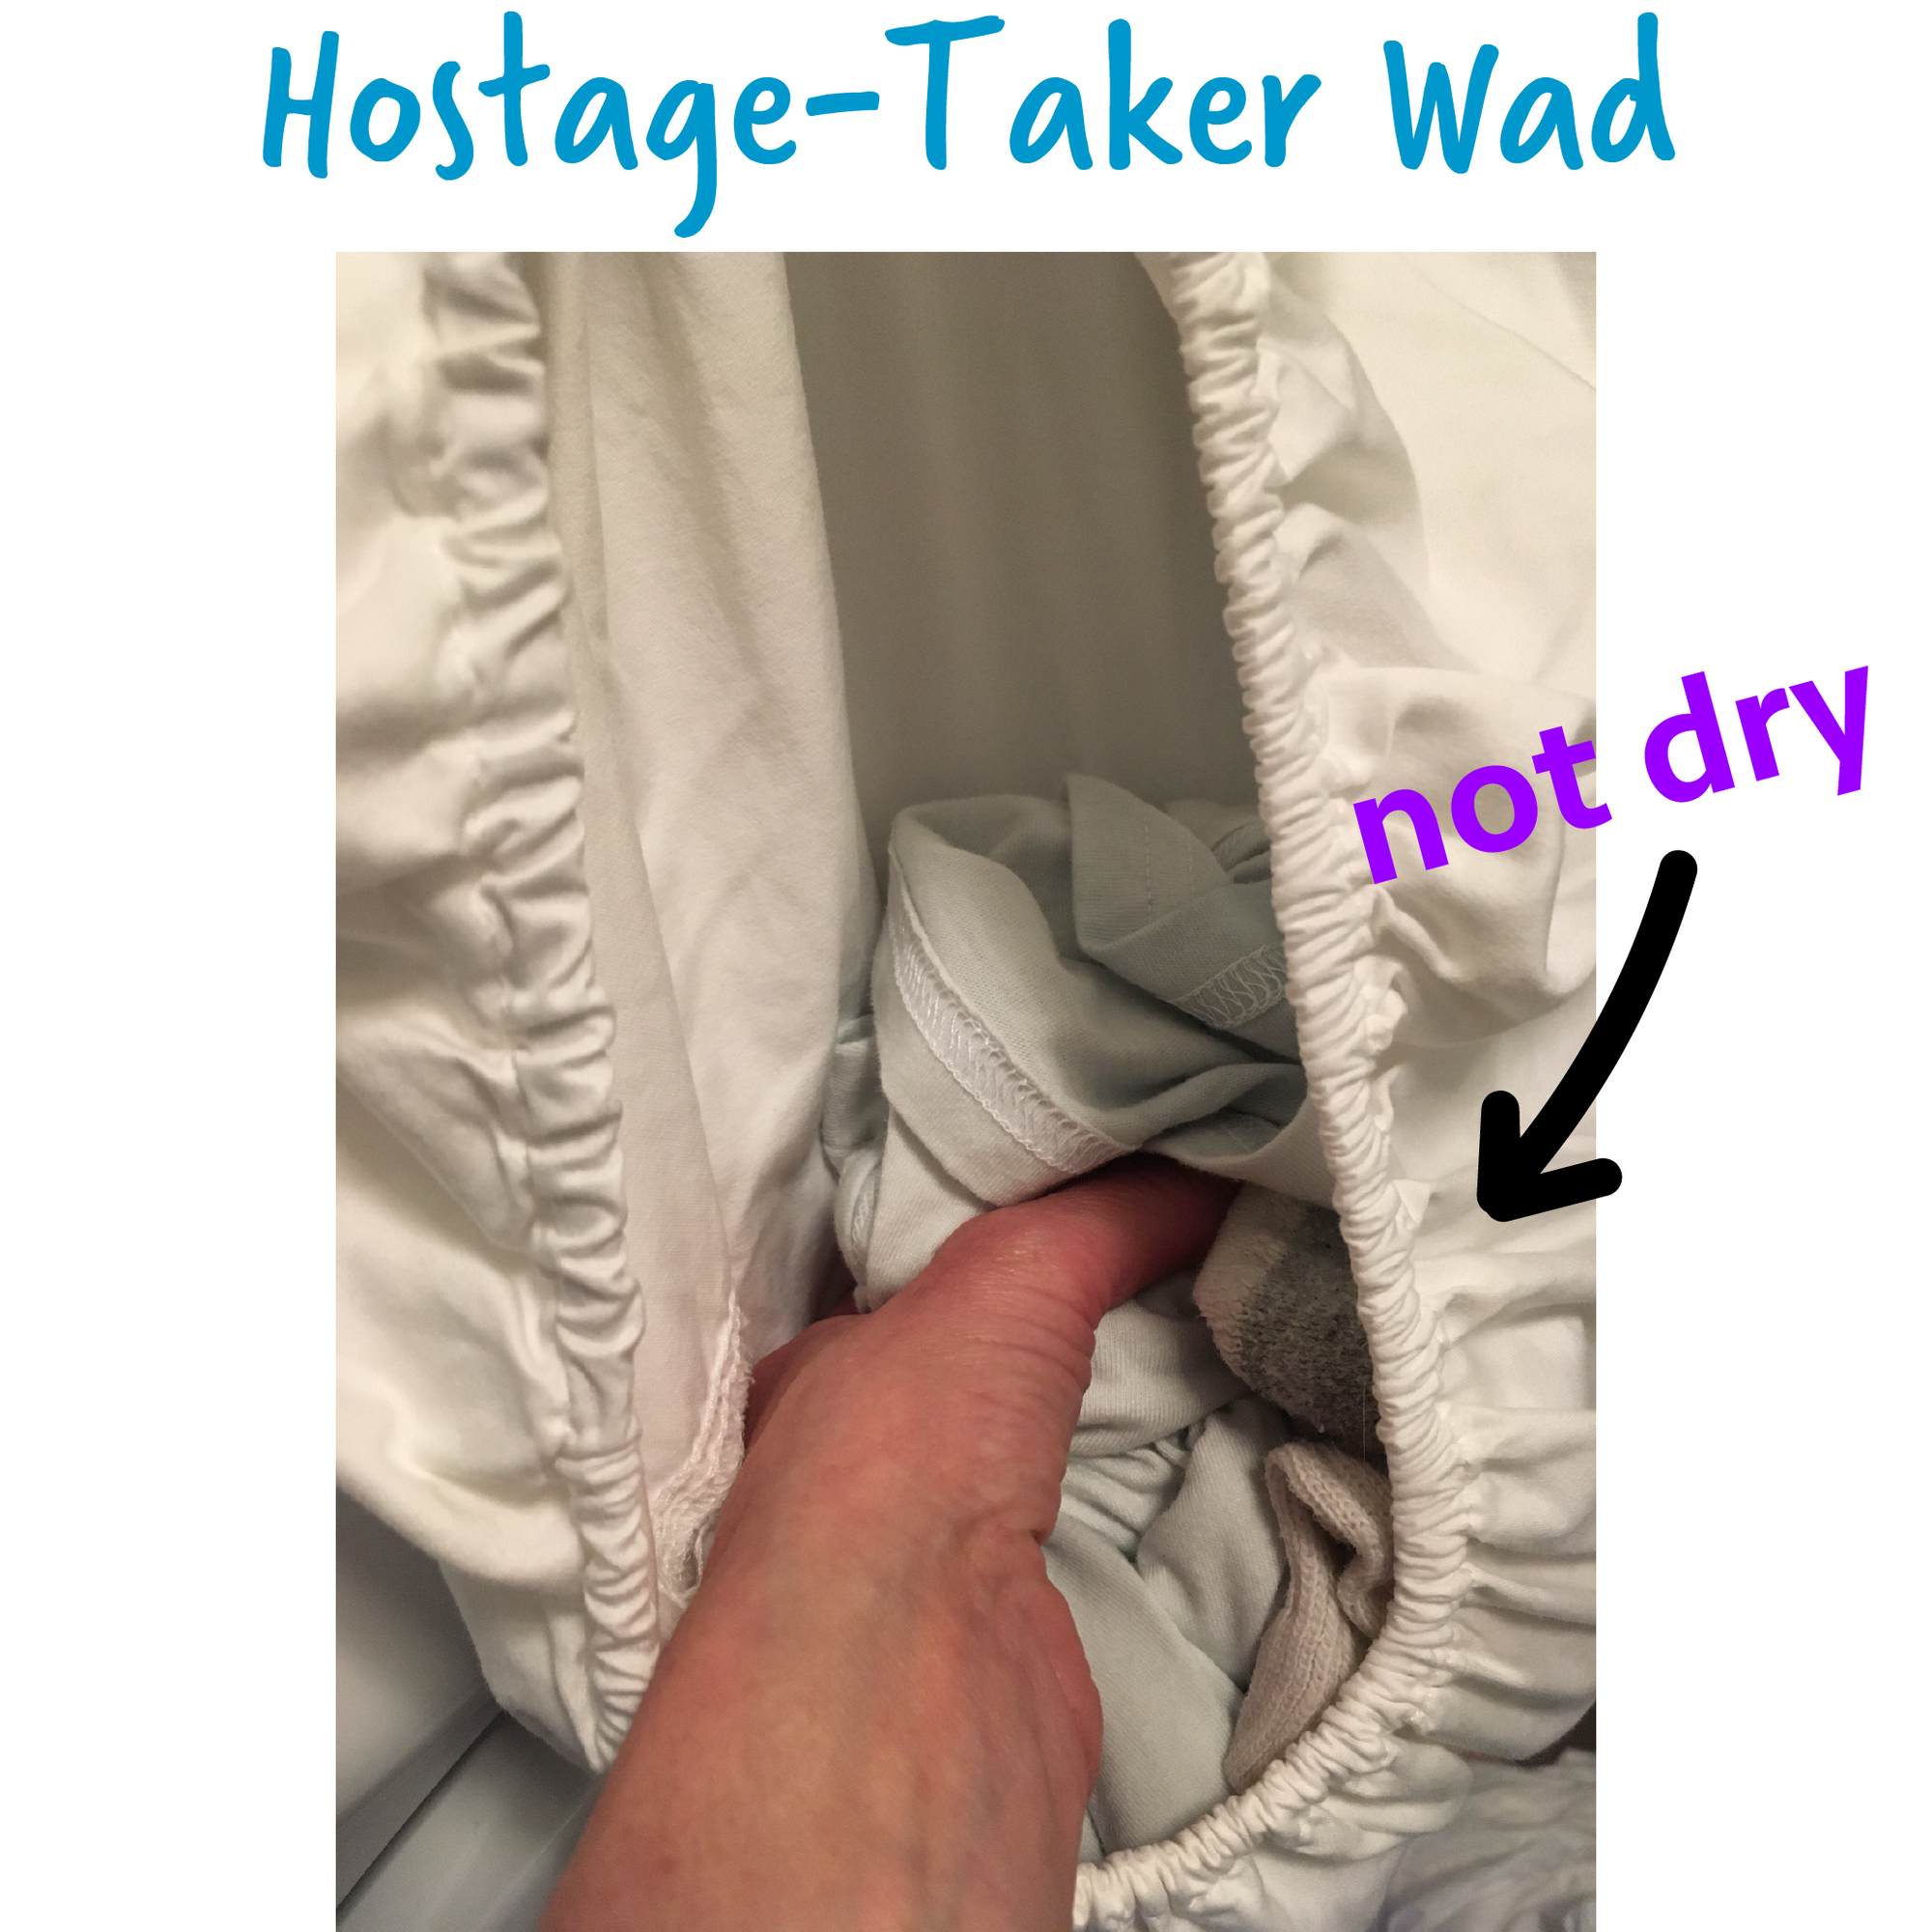 Wad-Free solves the problem of Hostage-Taker Wads when wet items get trapped inside the fitted sheet with elastic